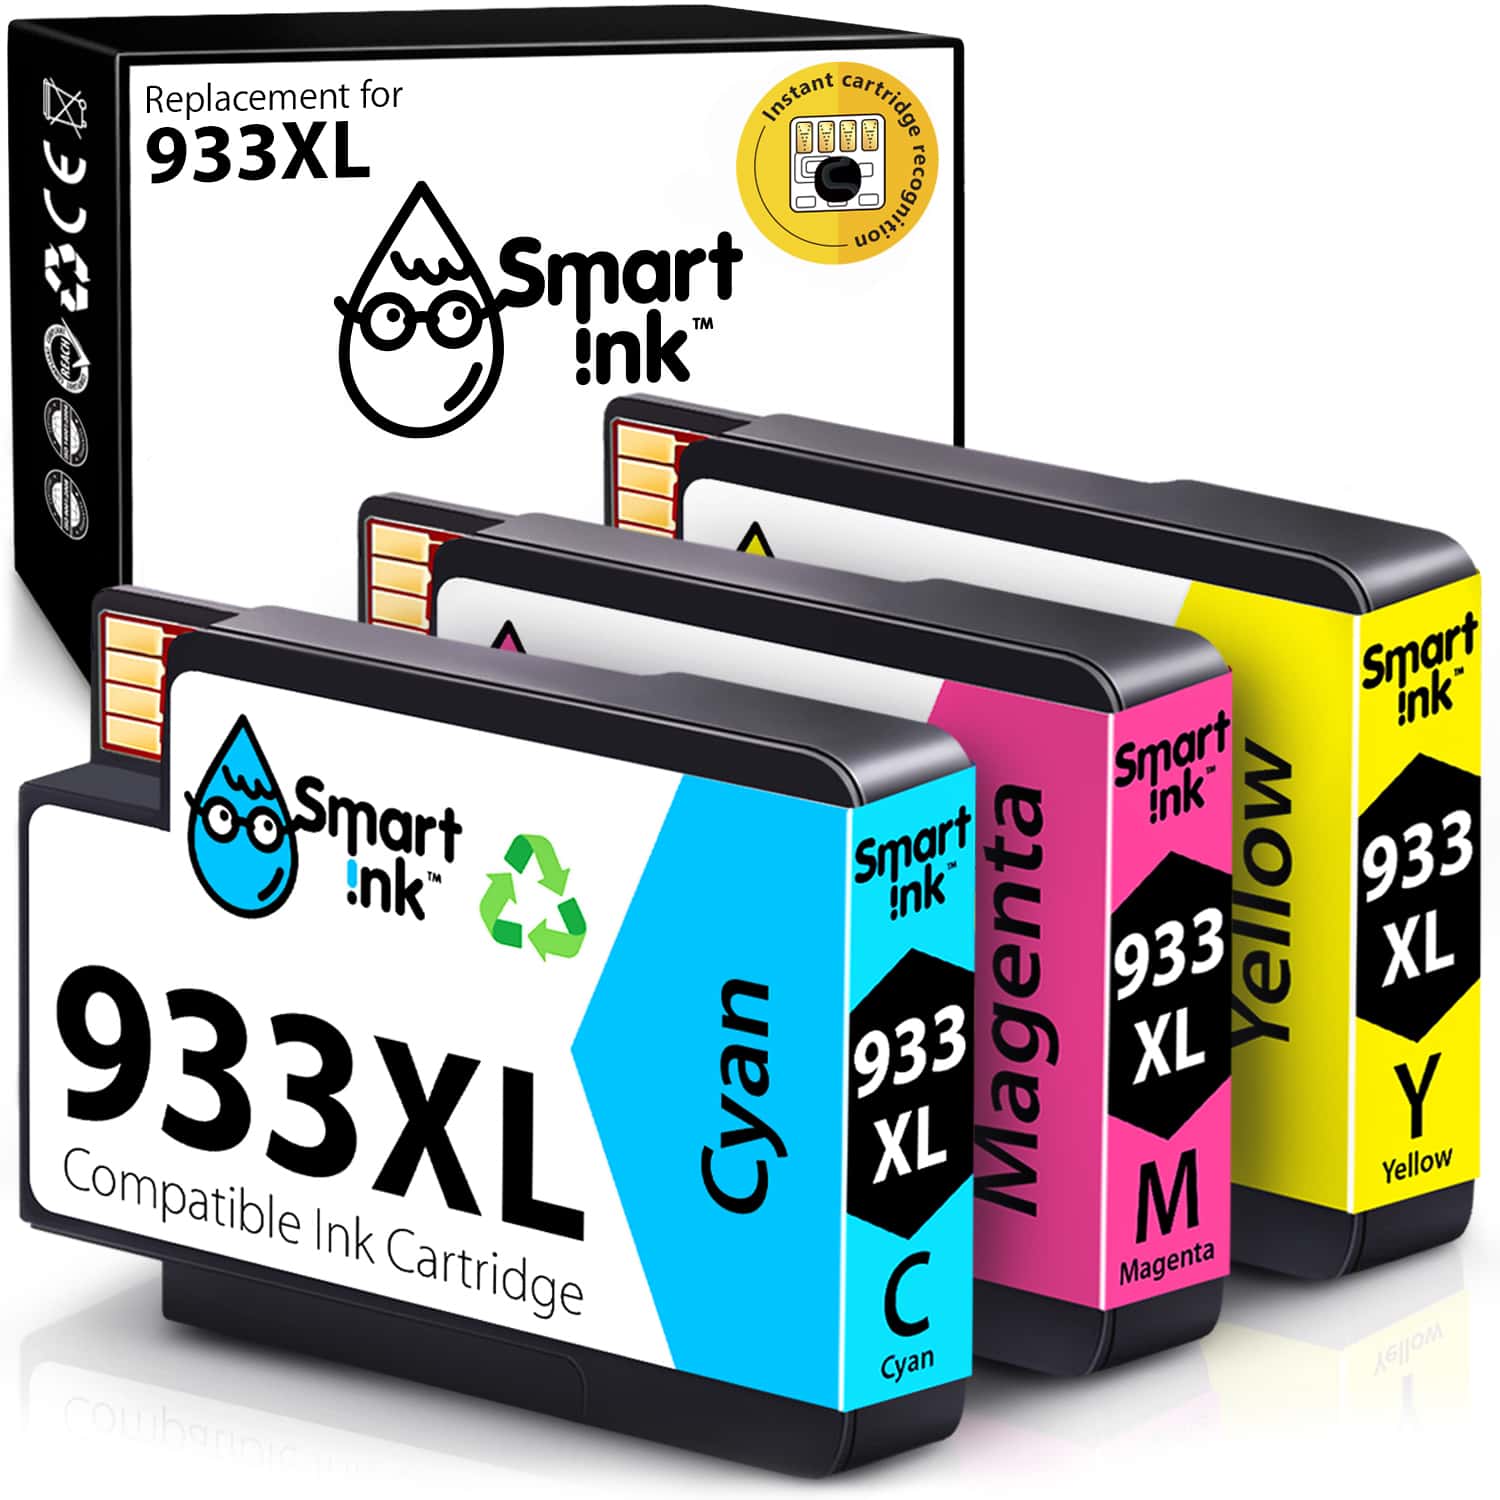 HP 932, 933 Ink Cartridge Replacement Buy Printer Cartridges USA at the best price | Smart Ink